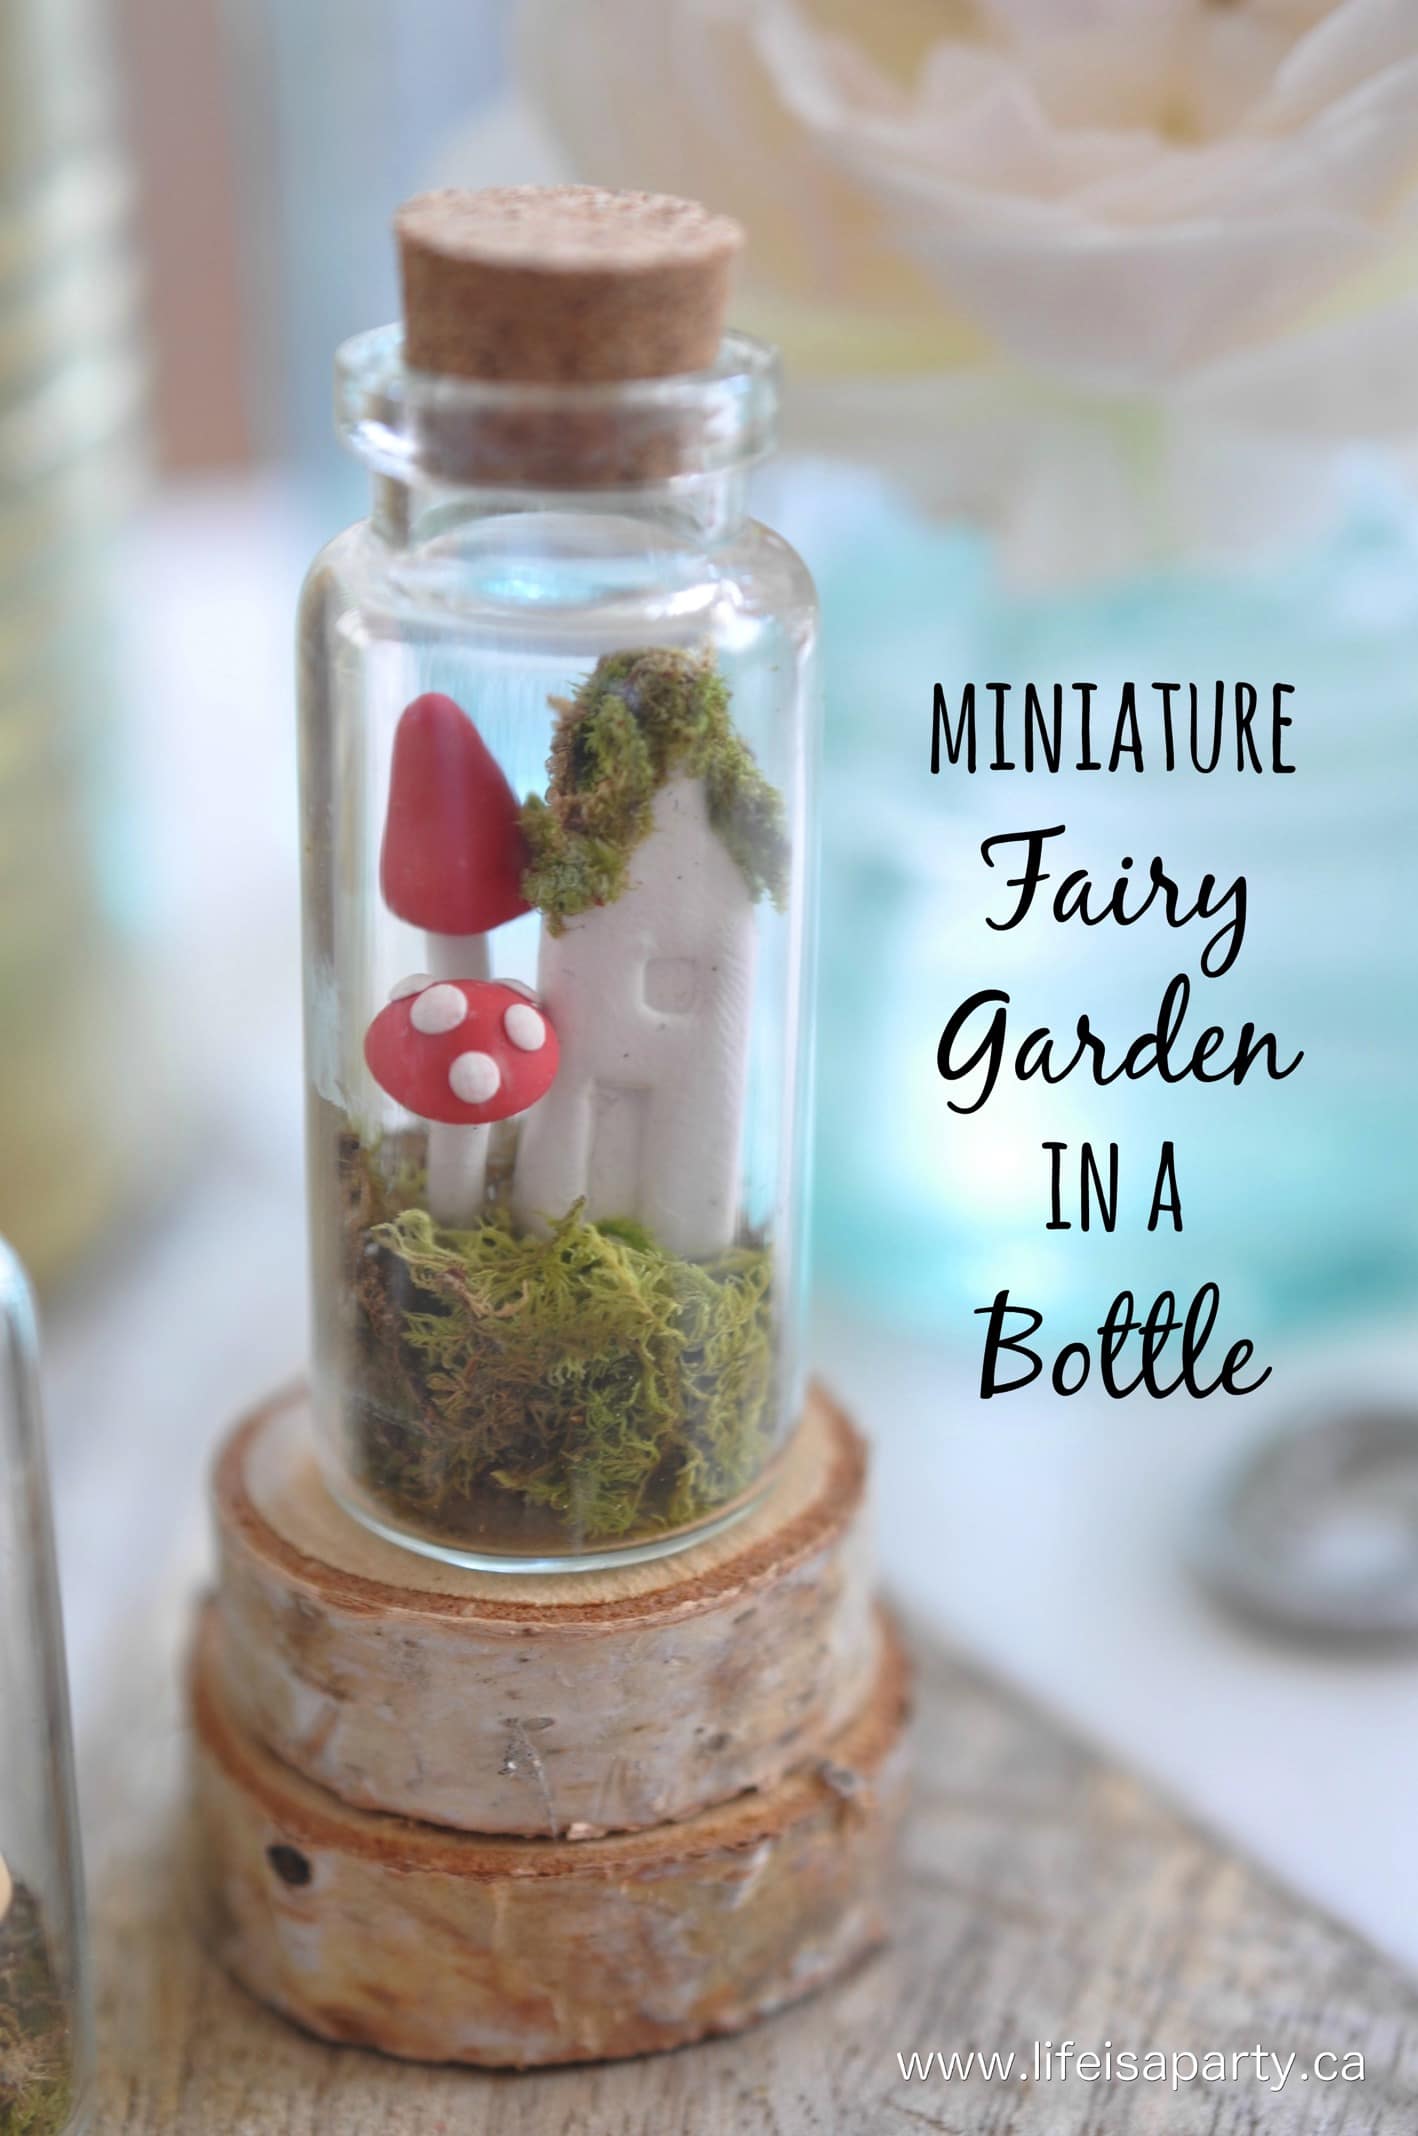 How To Make A Miniature Fairy Garden In A Jar: Tutorial using polymer clay to make adorable mushrooms and a fairy house, and then arrange in a teeny, tiny glass bottle. 